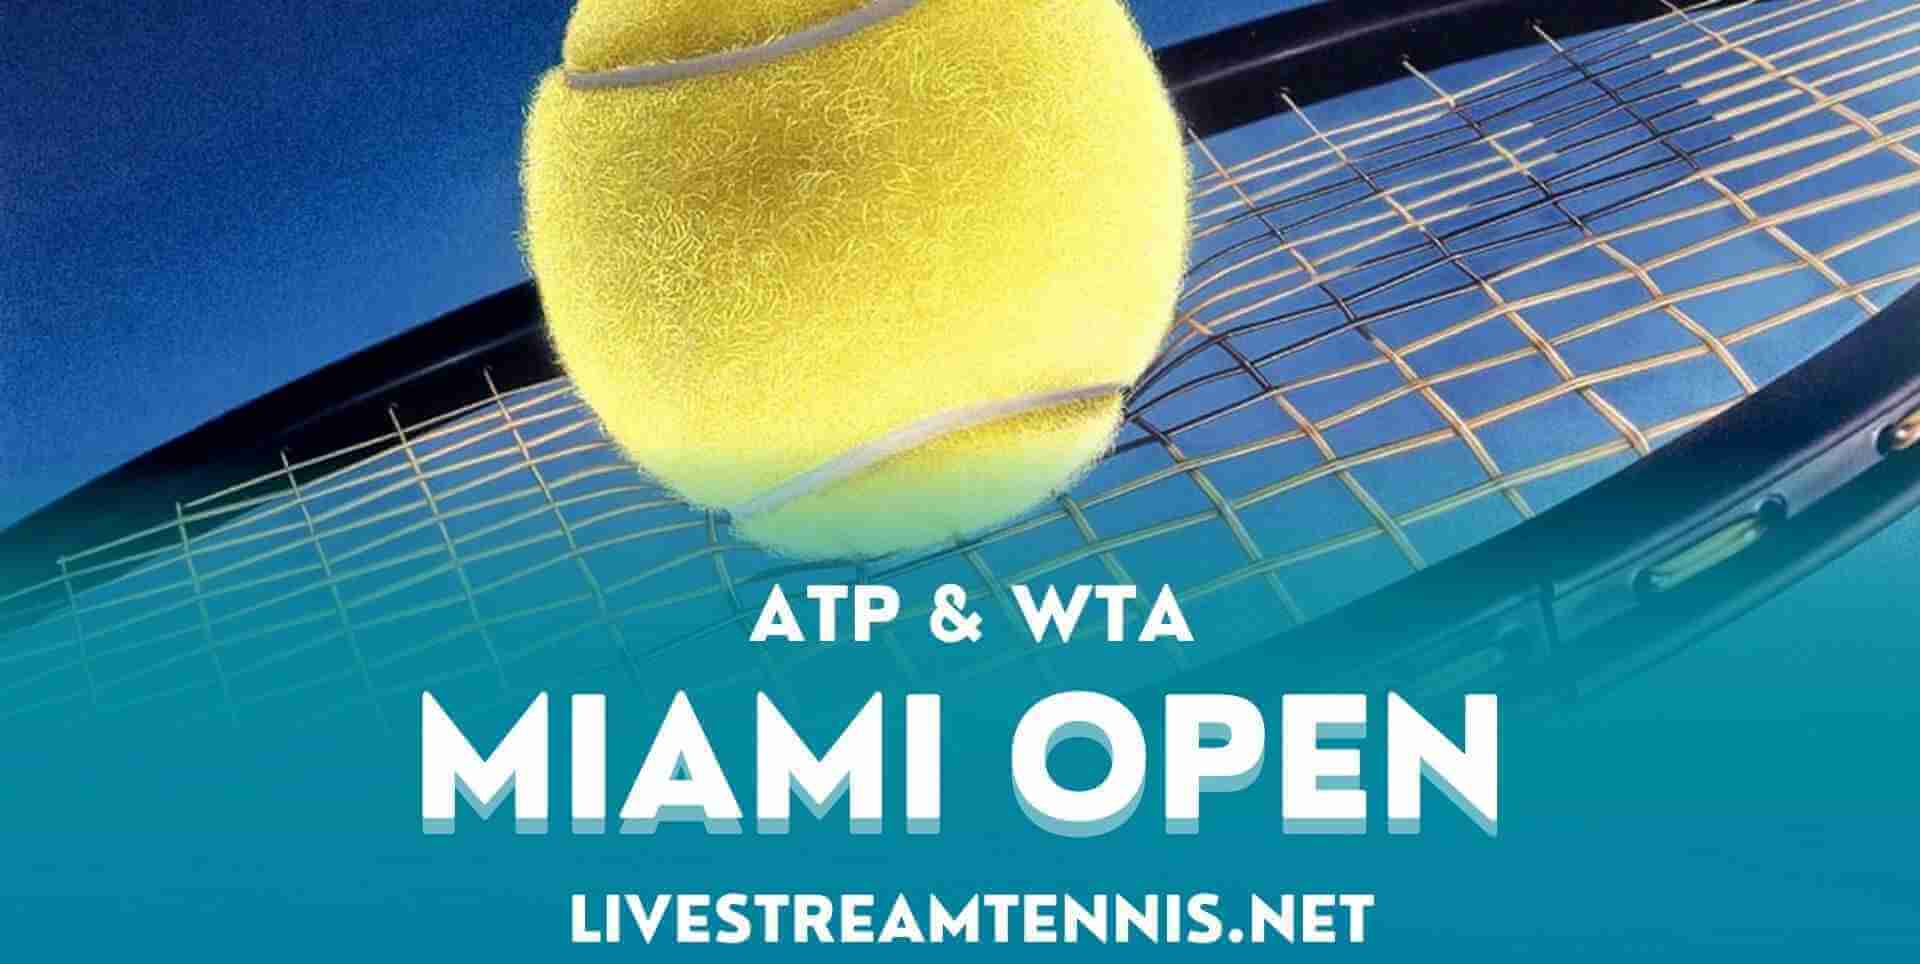 How To Watch Miami Open Live Stream Tennis